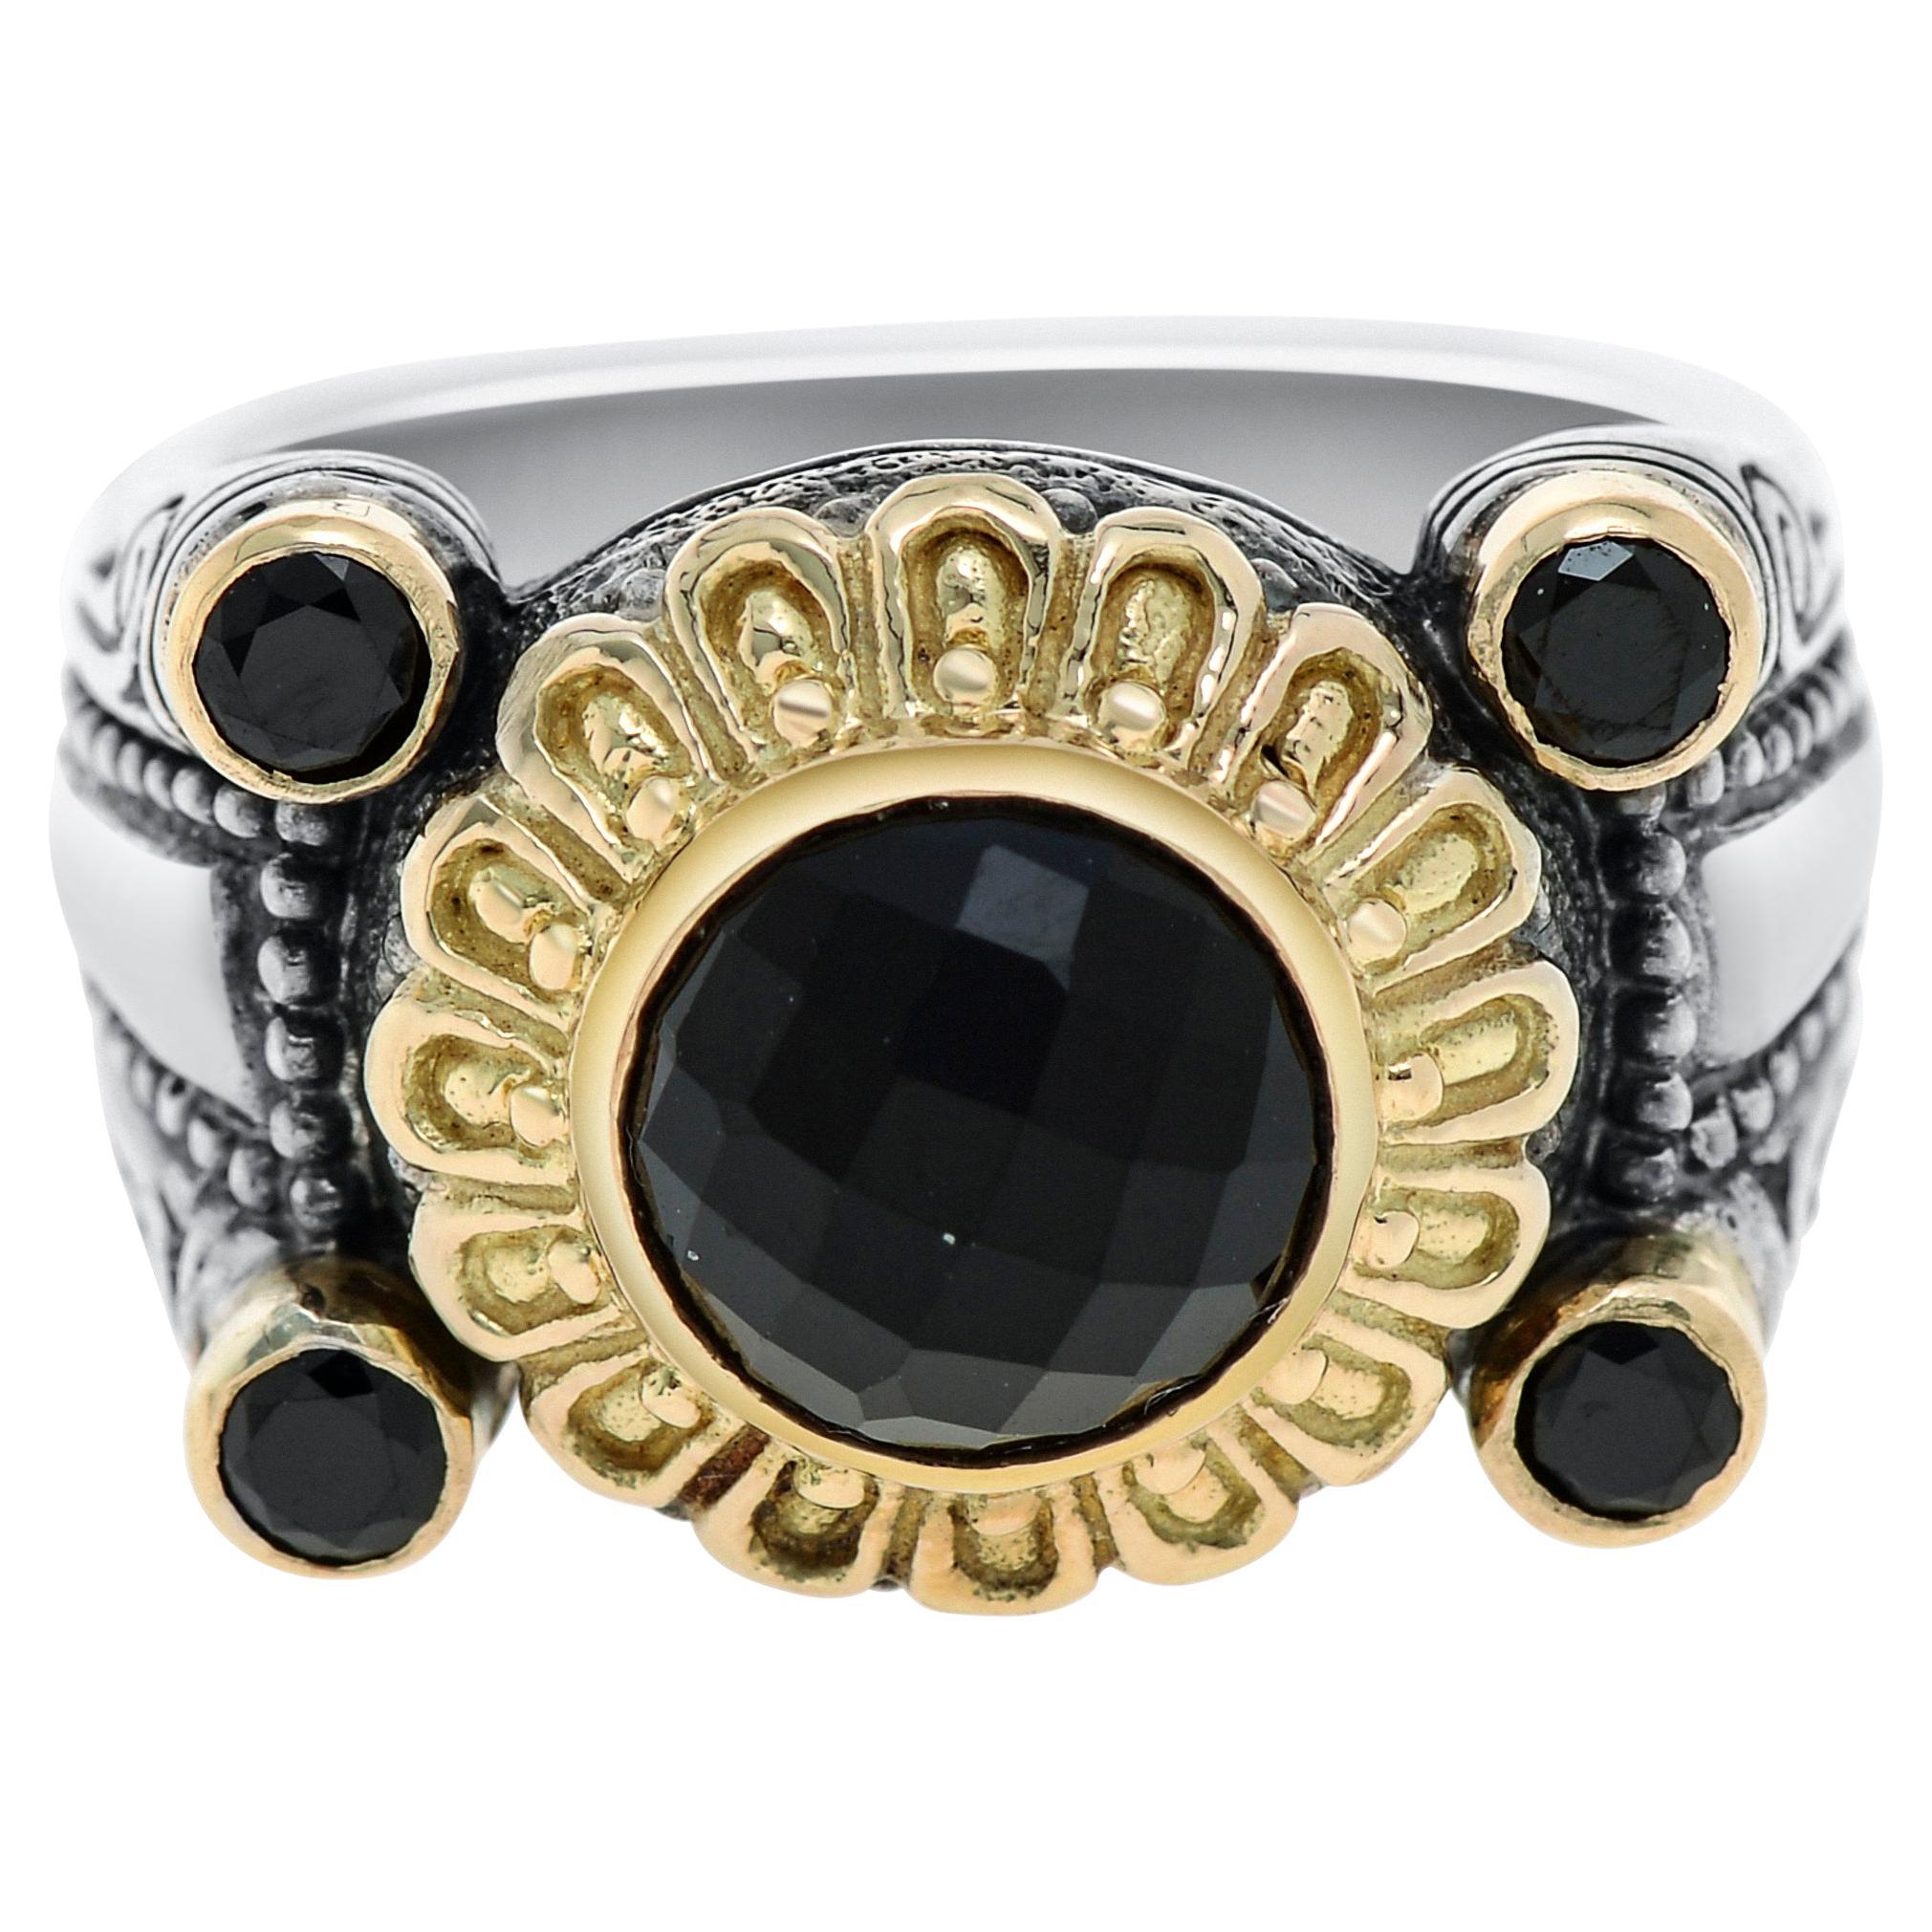 Konstantino Sterling Silver, 18K Gold and Onyx Ring sz 7.25